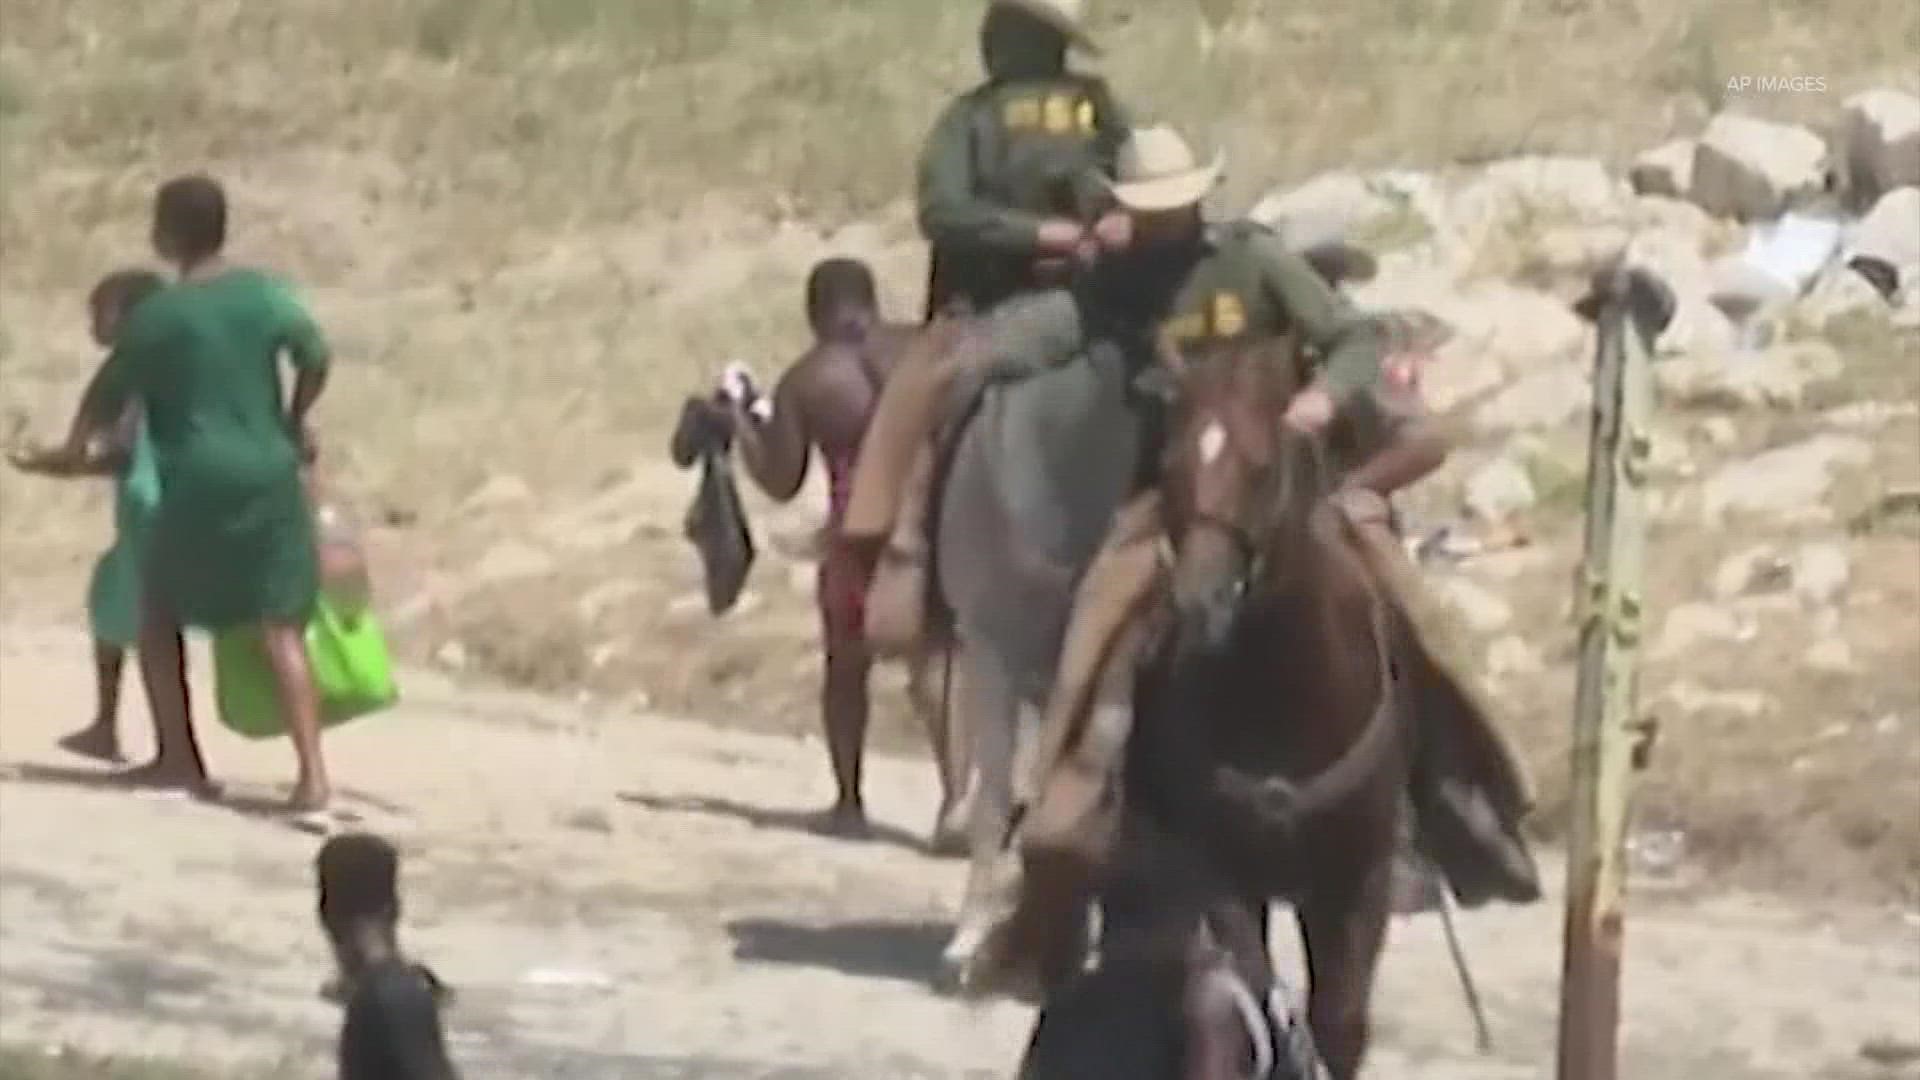 Department of Homeland Security Secretary Alejandro Mayorkas and Border Patrol Chief Raul Ortiz said they would look into agents on horseback using their horses